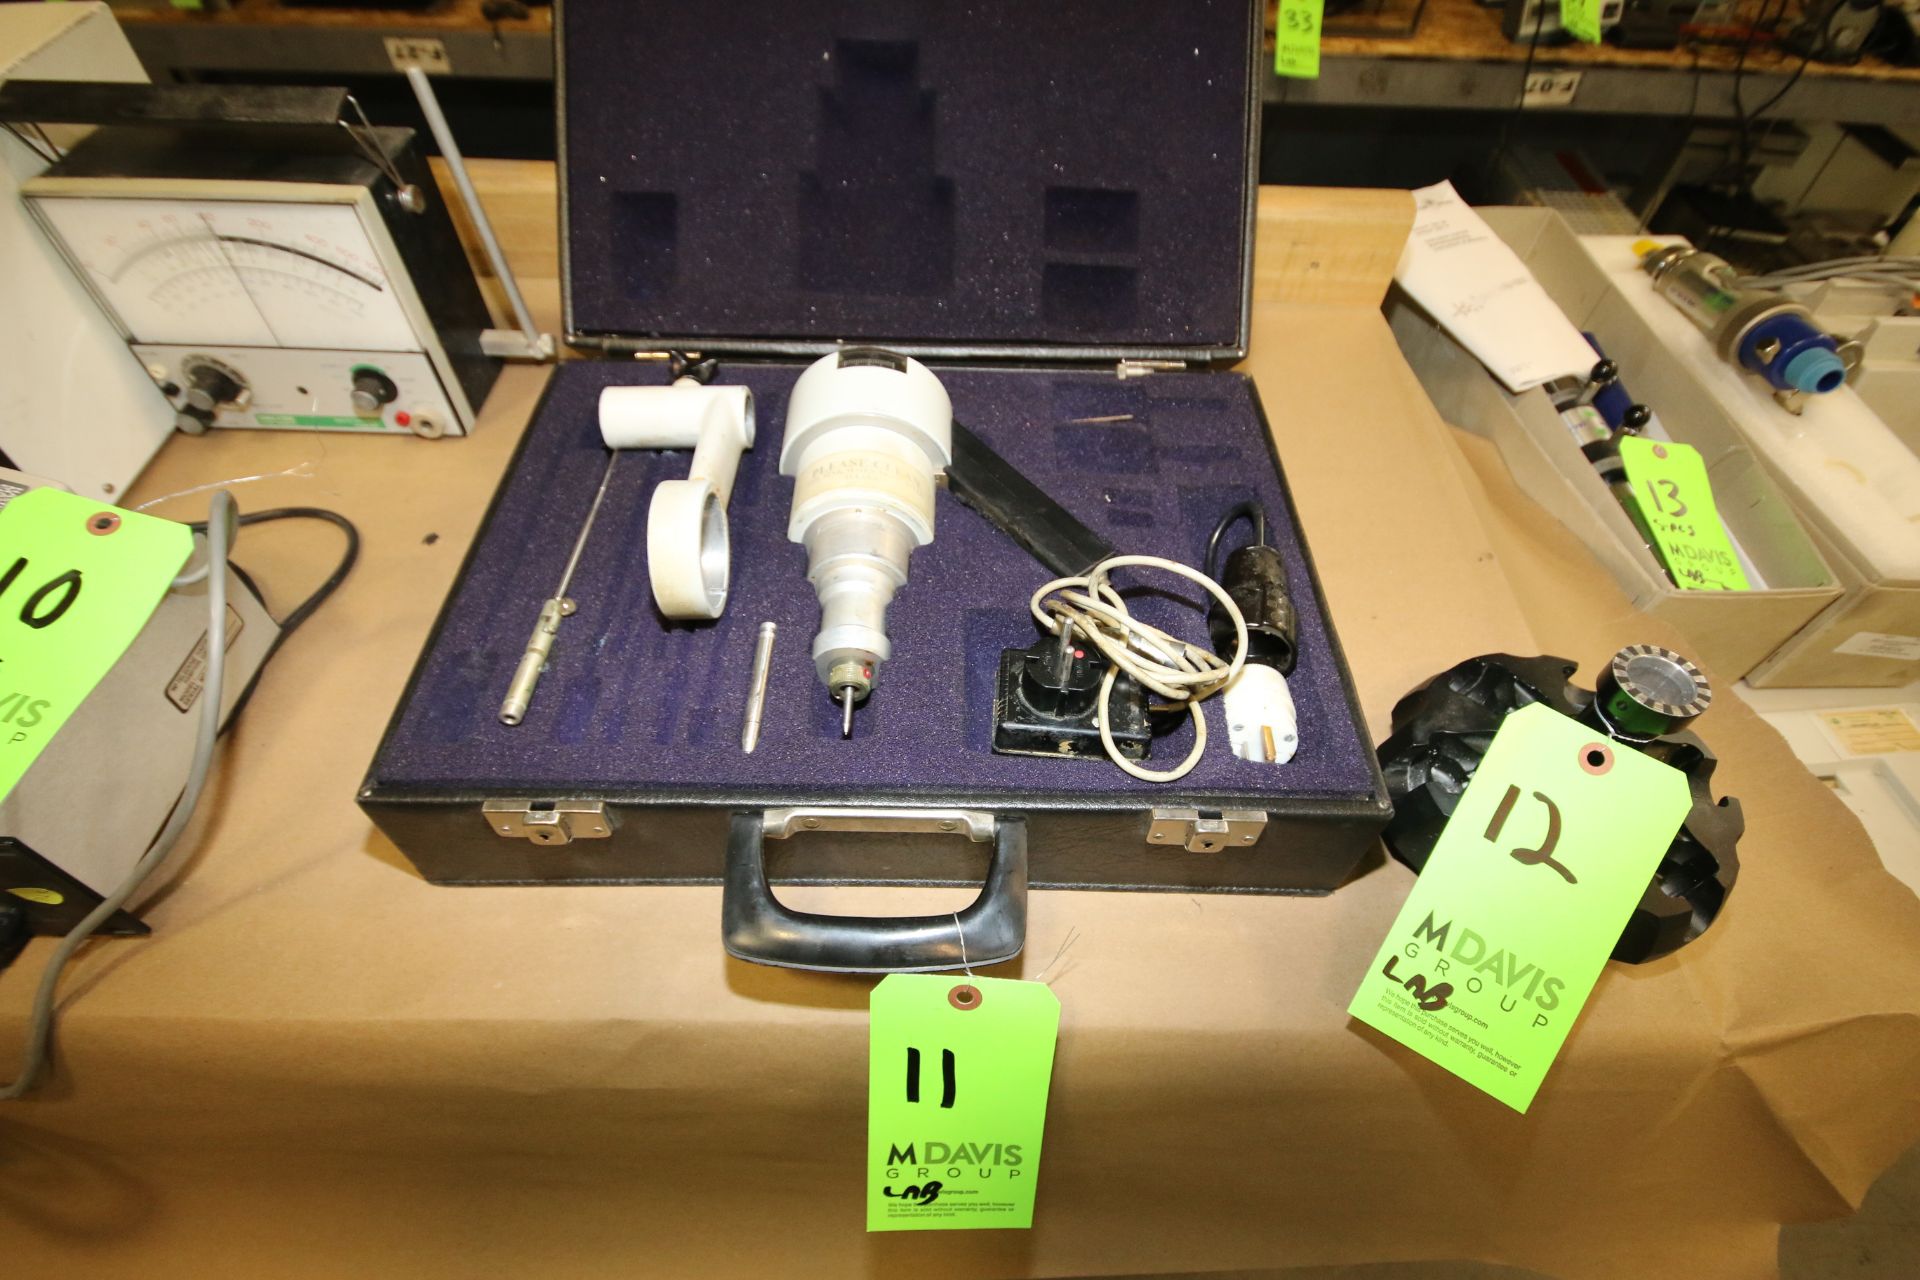 (2) Pcs. - Haake Viscometer, Model VT24 with Case, Also includes Haake C1 Immersion Heater